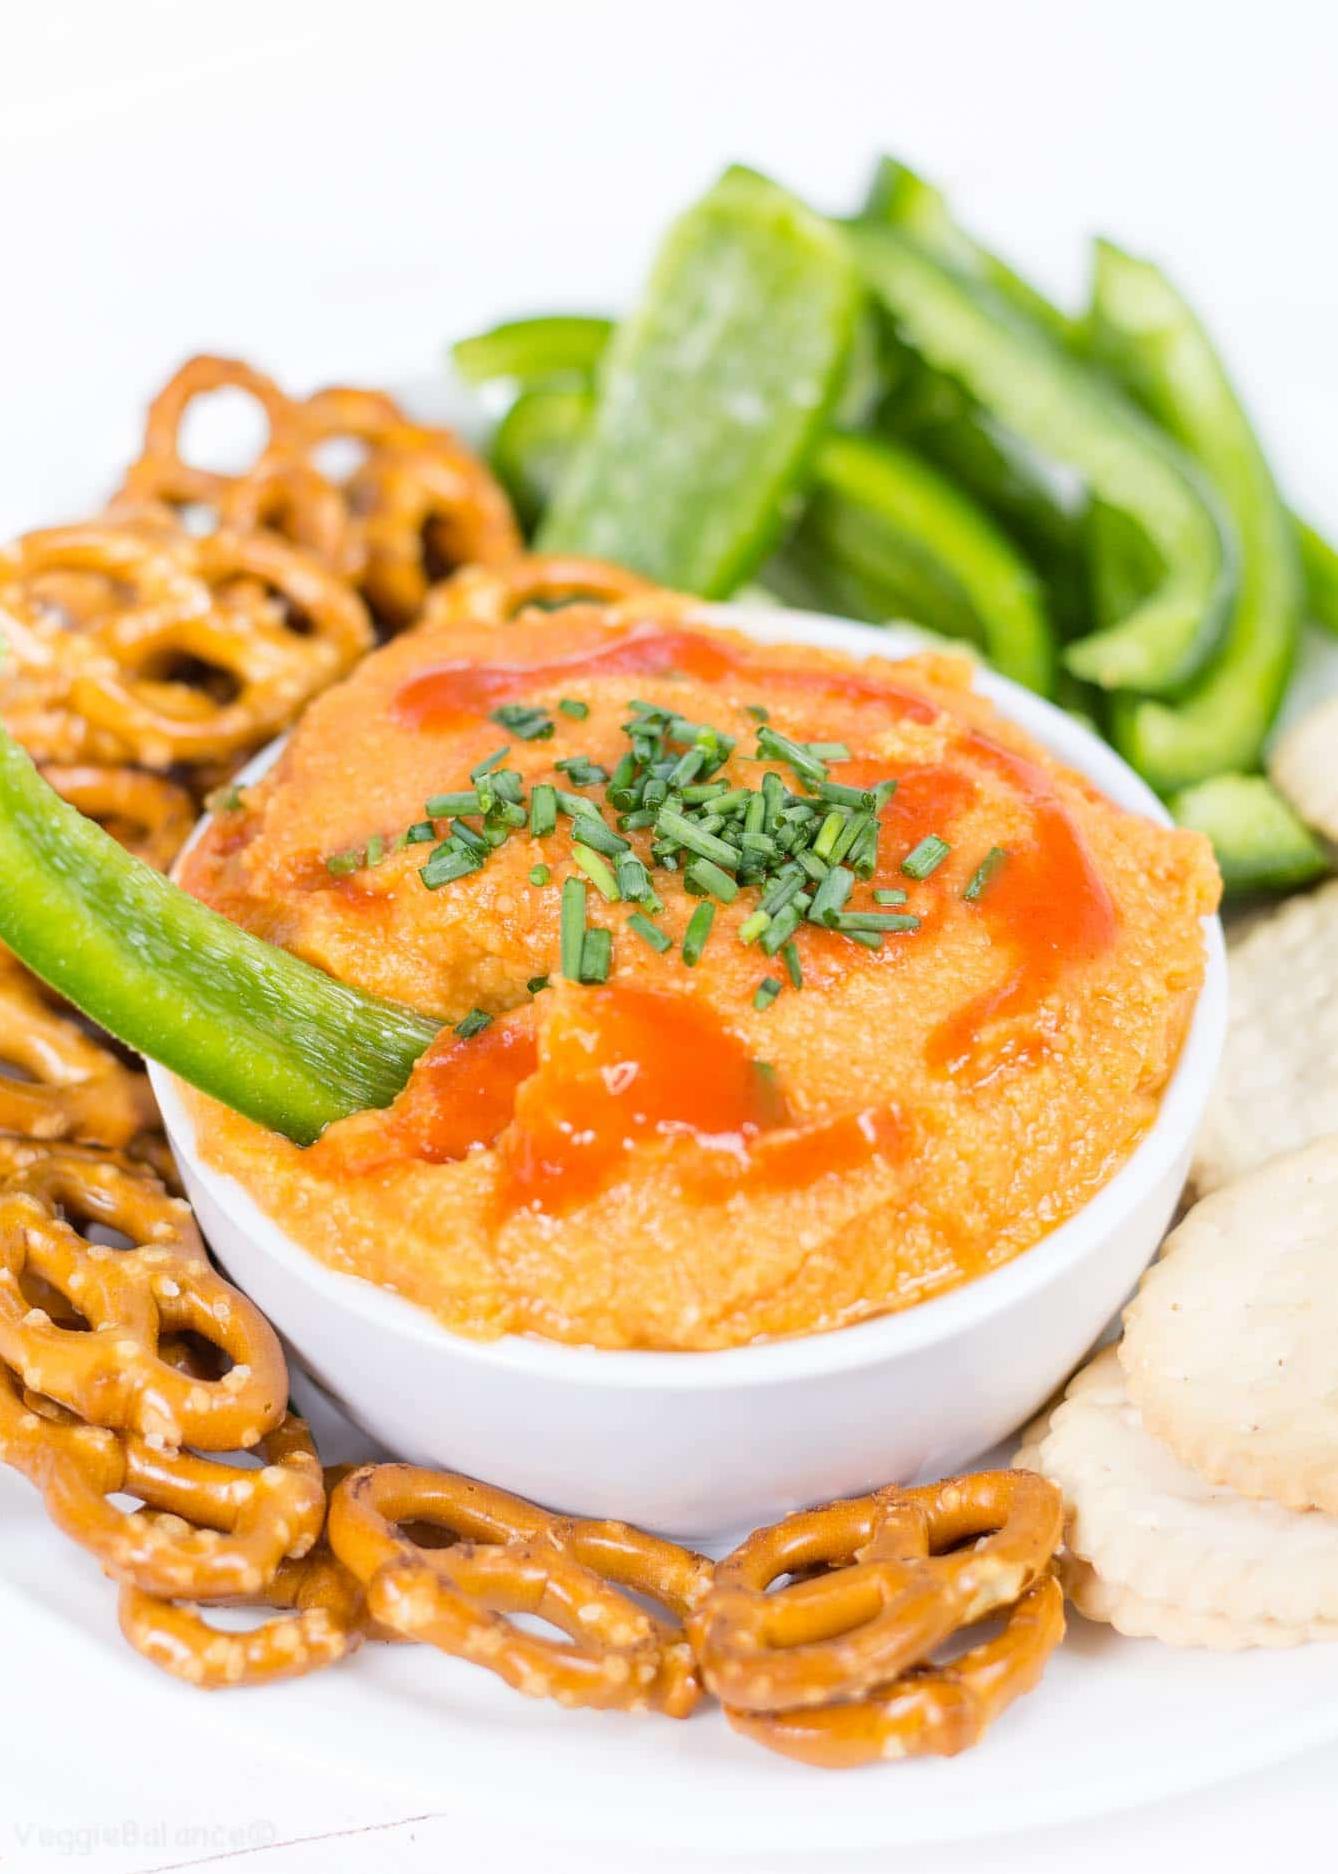  Get ready to dip into perfection with this tasty Buffalo Hummus.